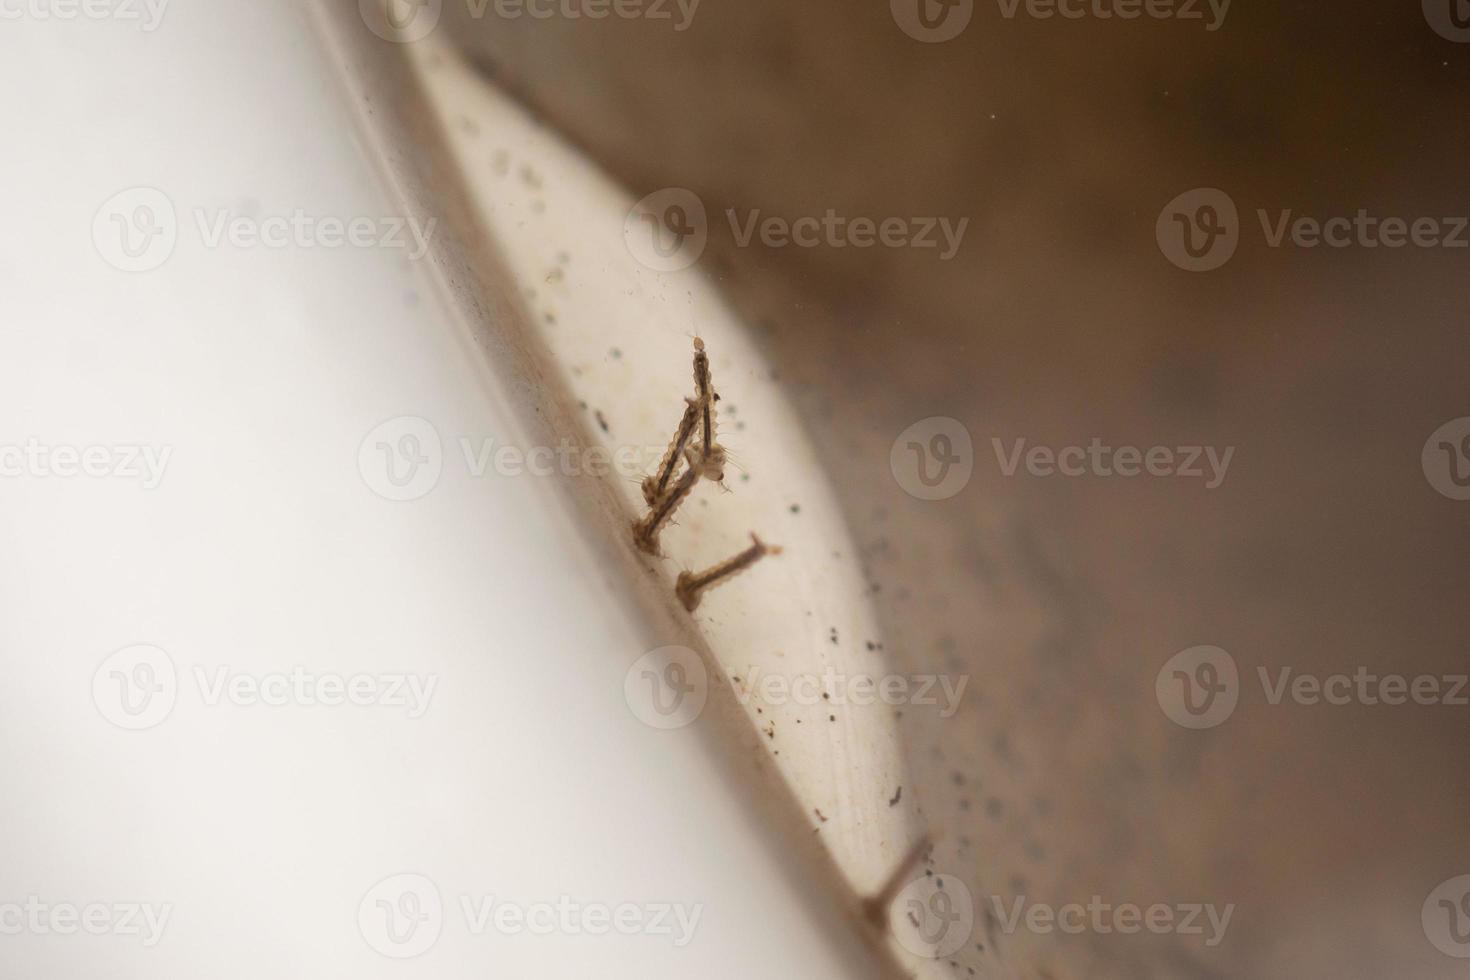 Mosquito larvae in stagnant water close up photo